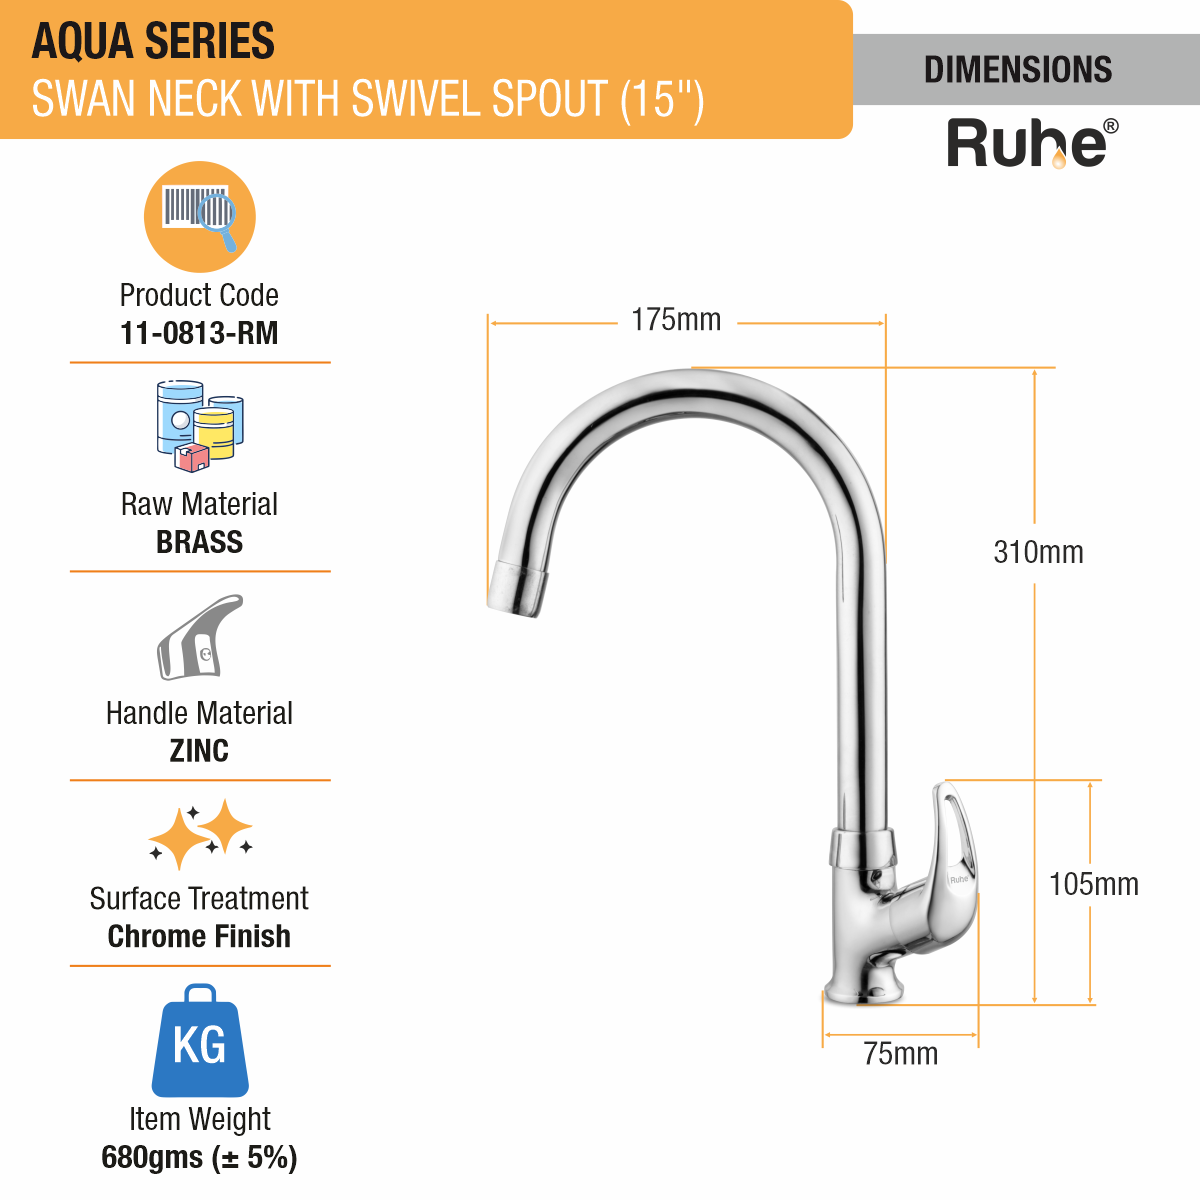 Aqua Swan Neck with Medium (15 inches) Round Swivel Spout Faucet dimensions and size